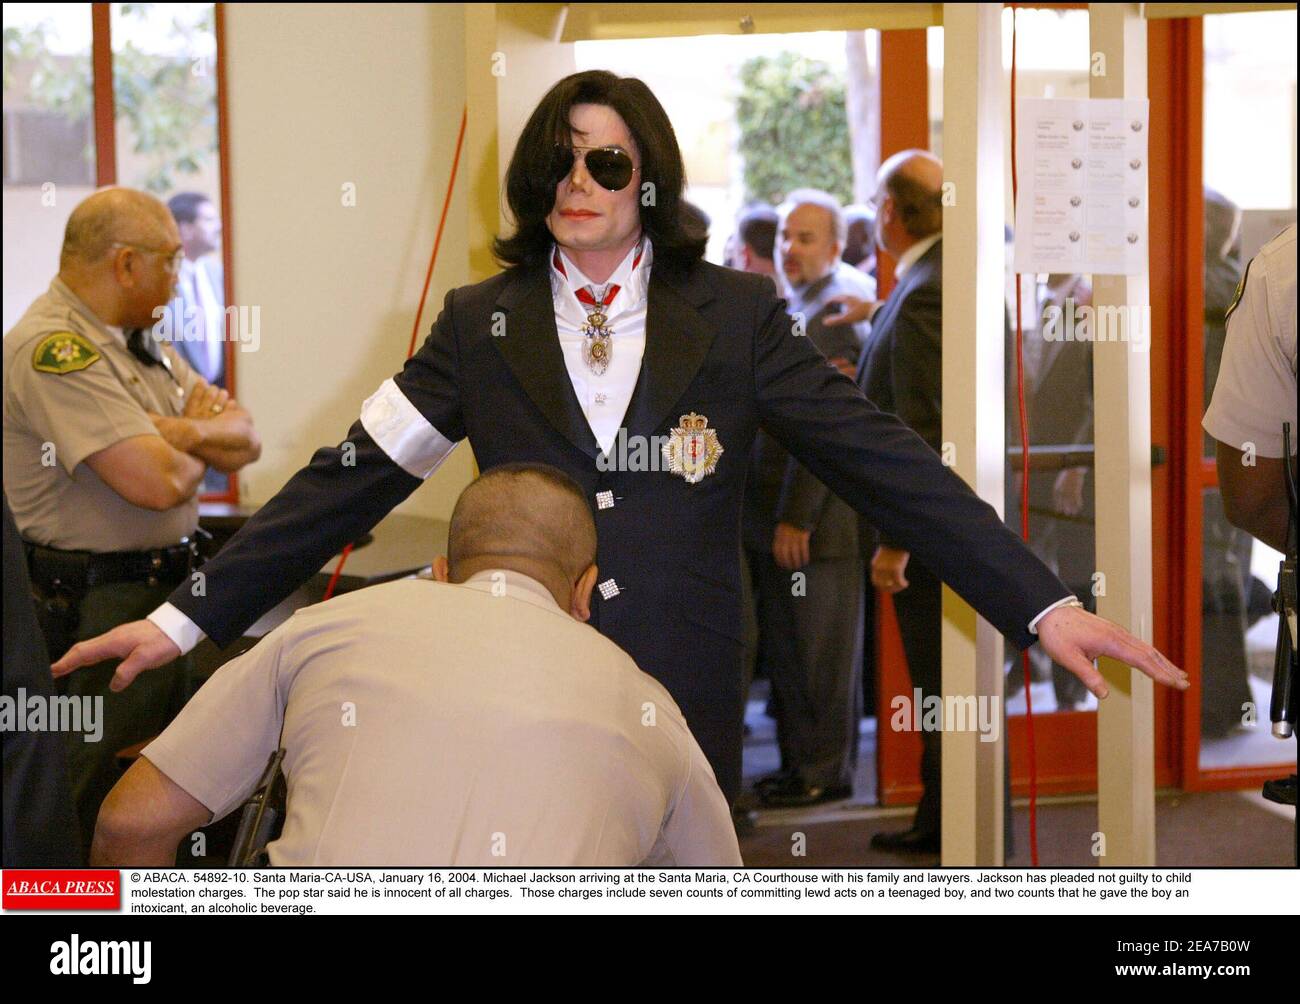 © ABACA. 54892-10. Santa Maria-CA-USA, January 16, 2004. Michael Jackson arriving at the Santa Maria, CA Courthouse with his family and lawyers. Jackson has pleaded not guilty to child molestation charges. The pop star said he is innocent of all charges. Those charges include seven counts of committing lewd acts on a teenaged boy, and two counts that he gave the boy an intoxicant, an alcoholic beverage. Stock Photo